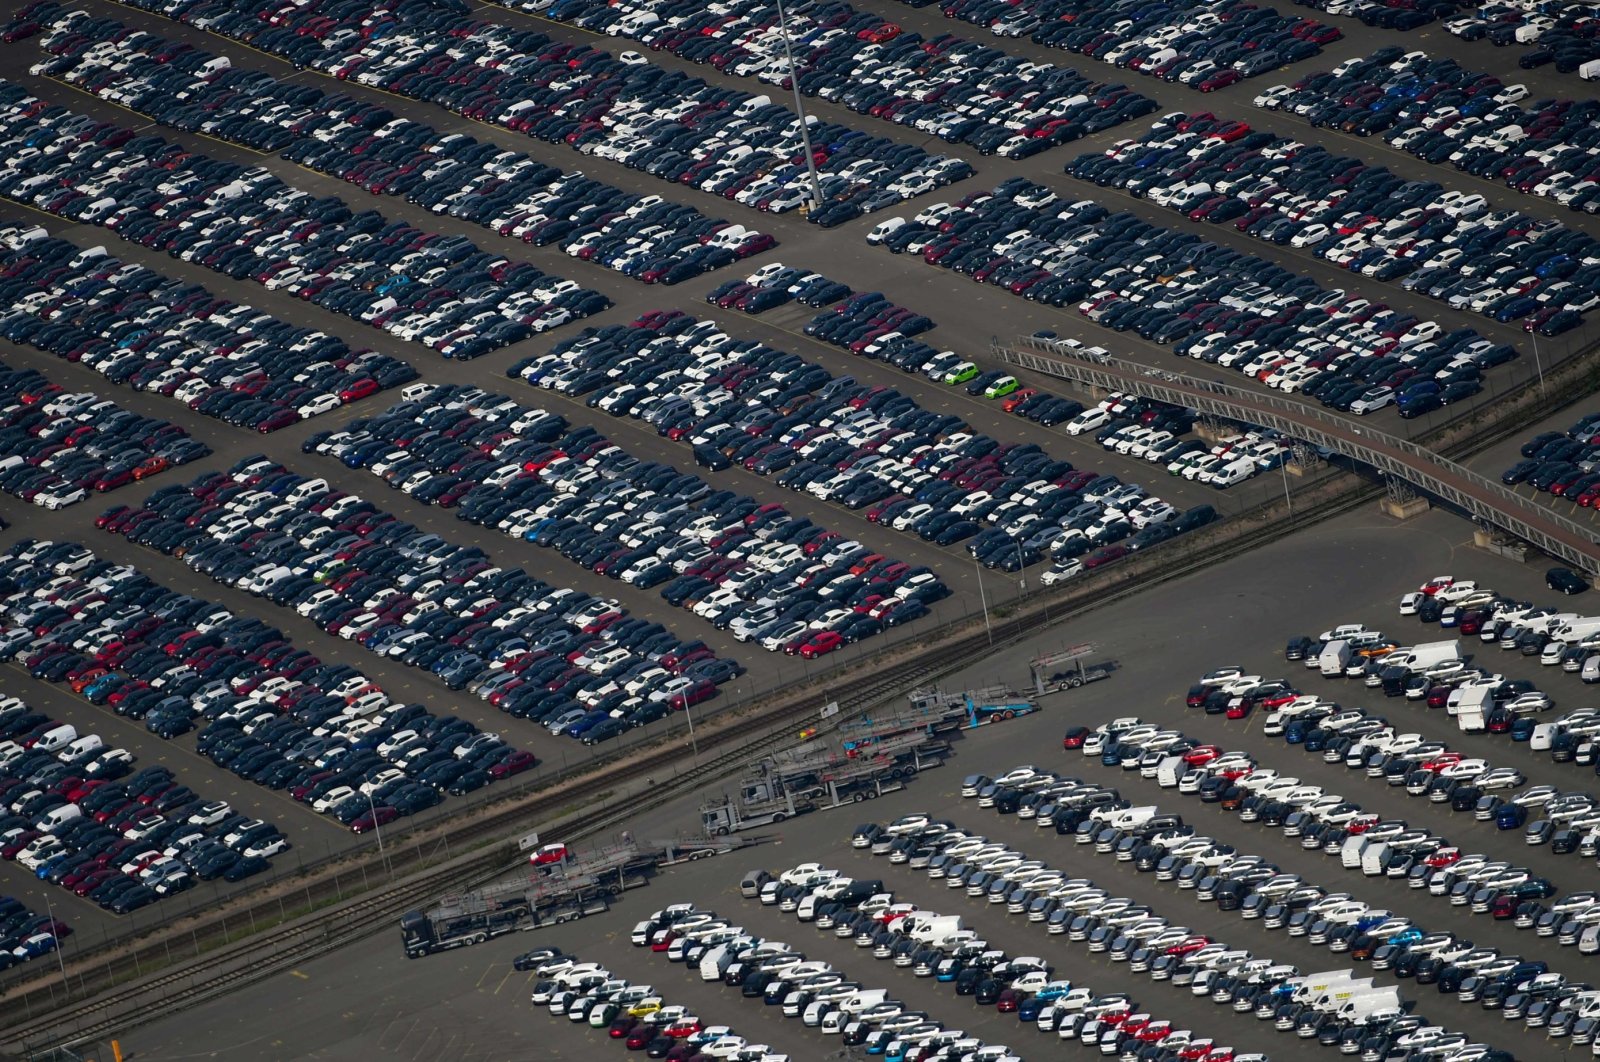 This aerial file photo shows new cars for sale parked at the harbor of Duisburg, western Germany, May 8, 2020. (AFP Photo)